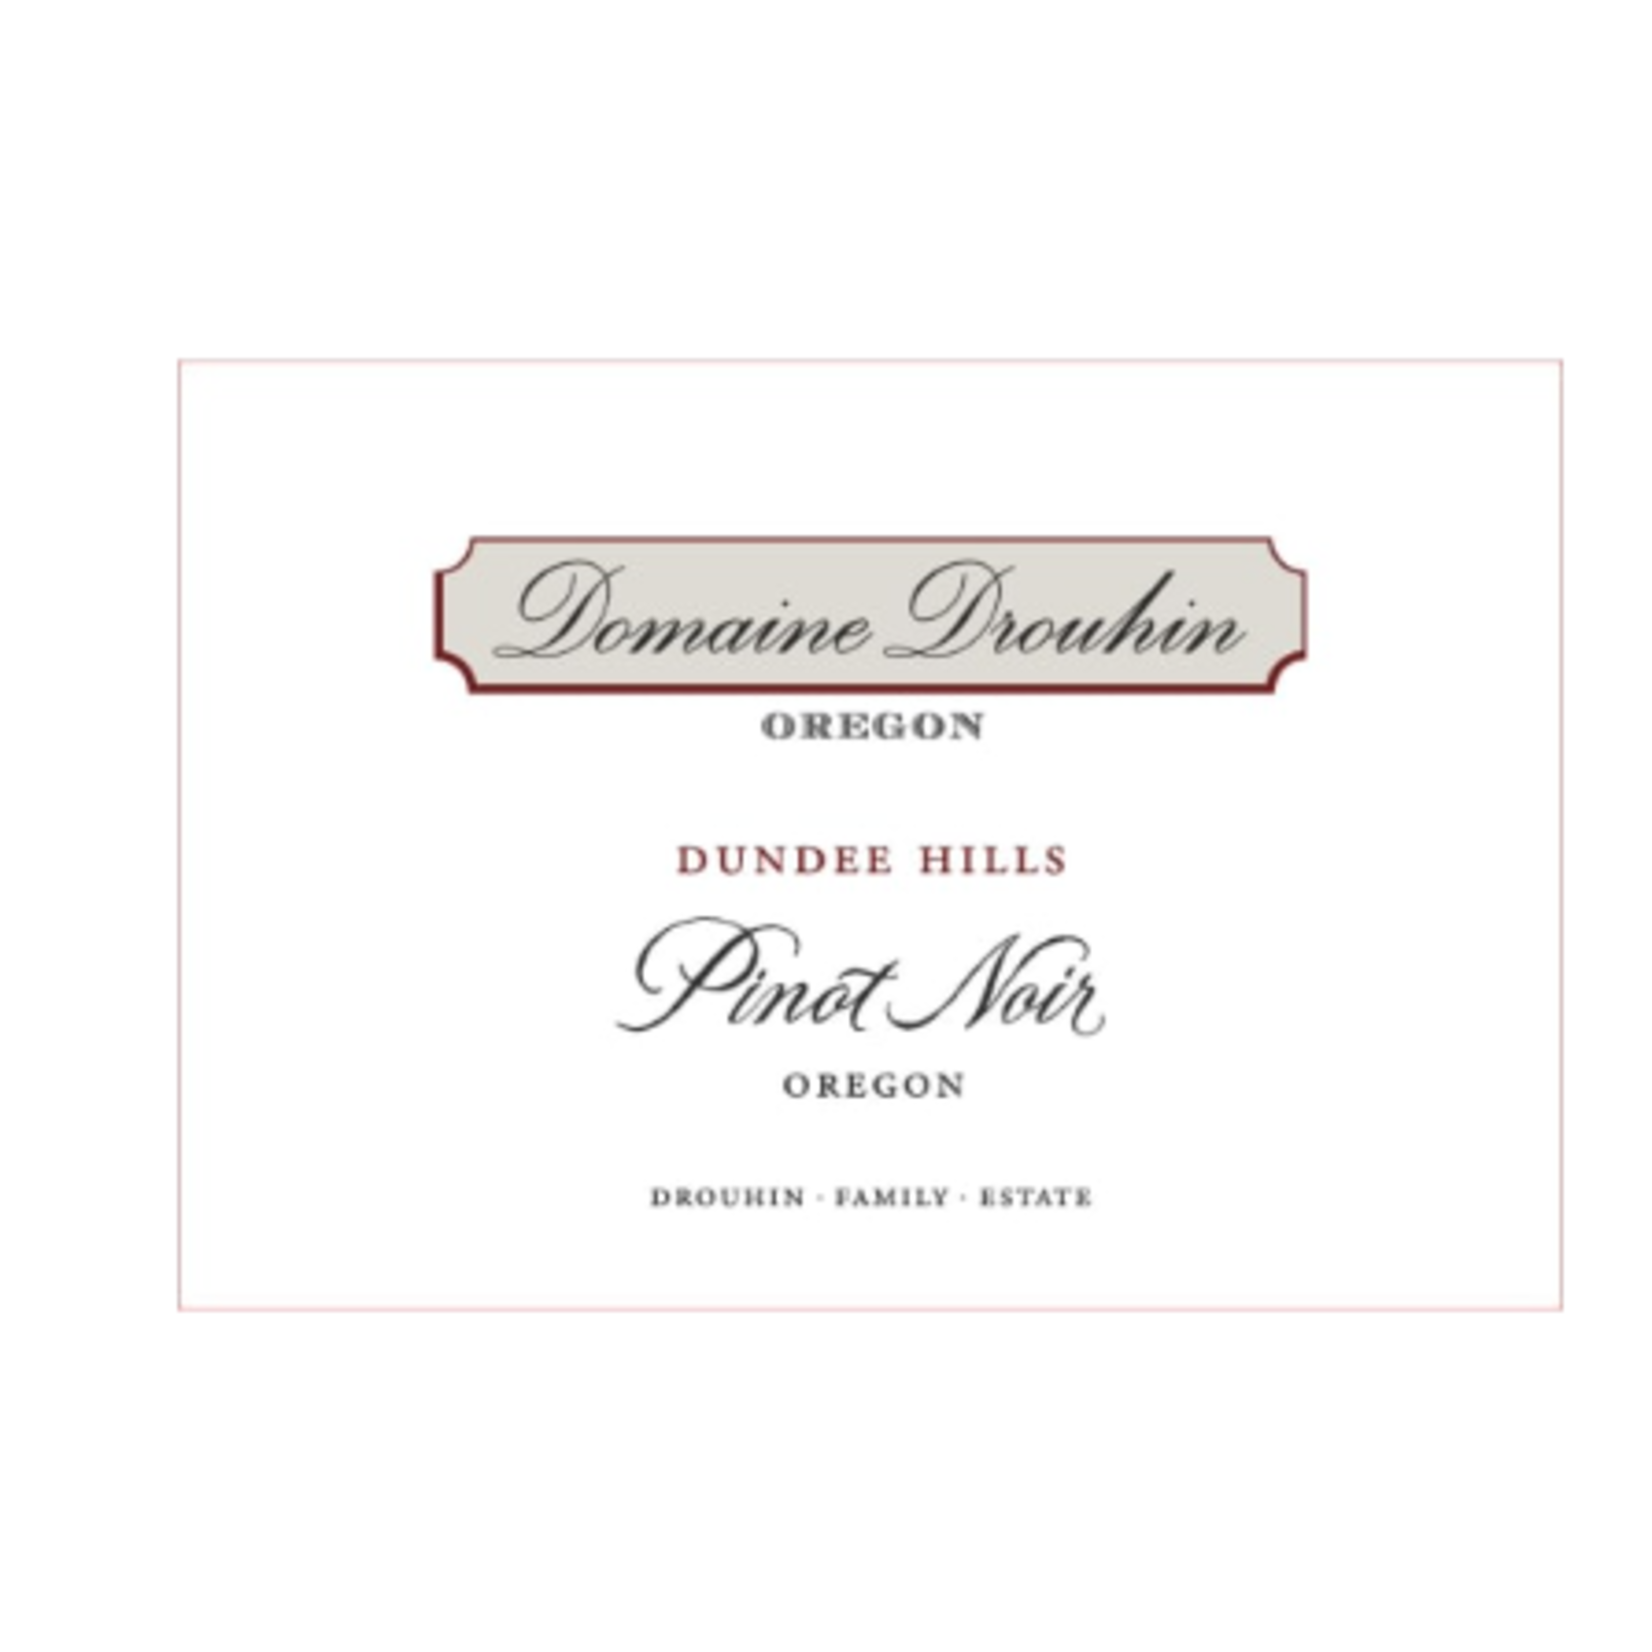 Drouhin Family Estate Domaine Drouhin Dundee Hills Pinot Noir 2022 Dundee Hills, Willamette Valley, Oregon